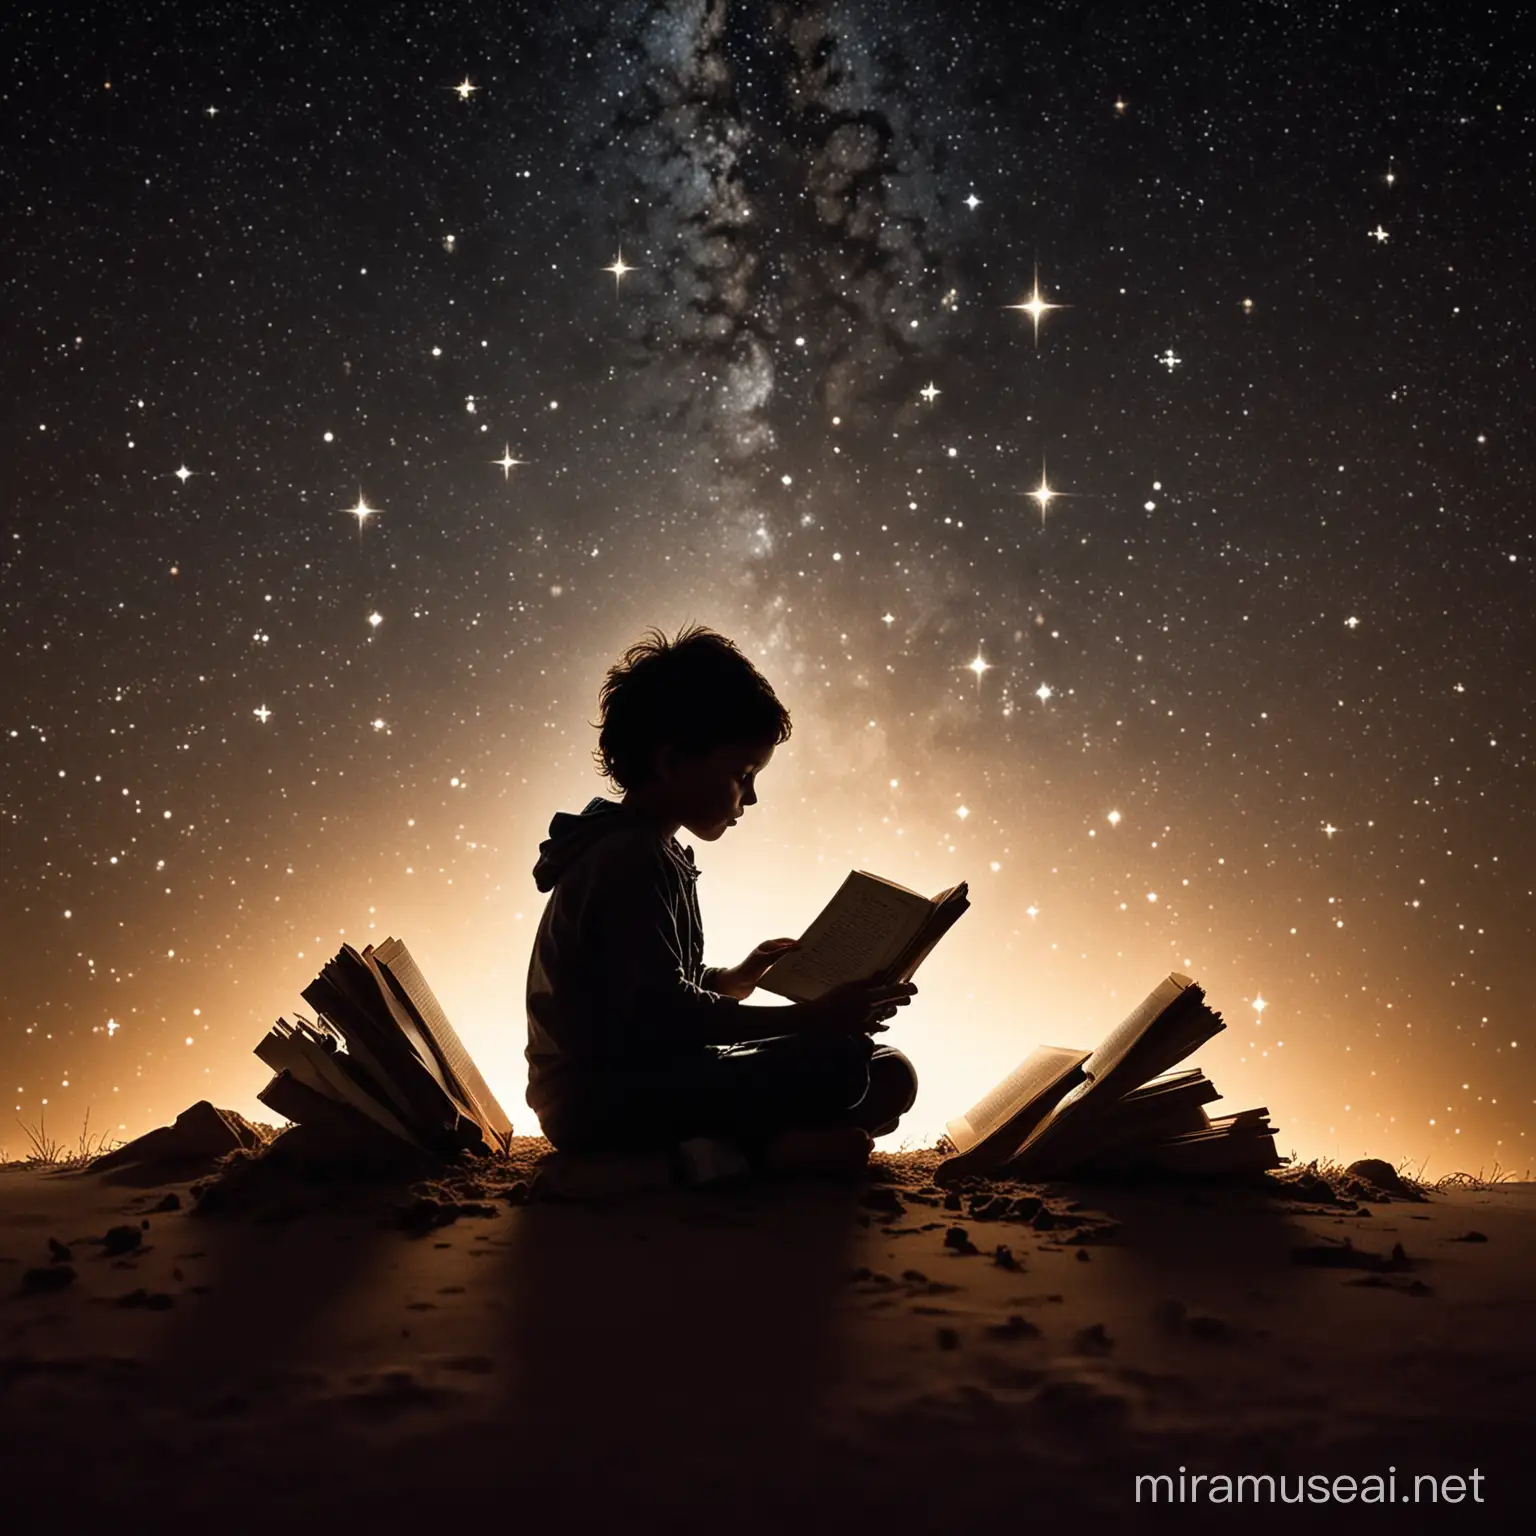 :kidz stories 
Storytelling Silhouette: A silhouette of a child sitting cross-legged with a book open in front of them, surrounded by stars or other magical elements, could evoke the idea of storytelling and wonder.

